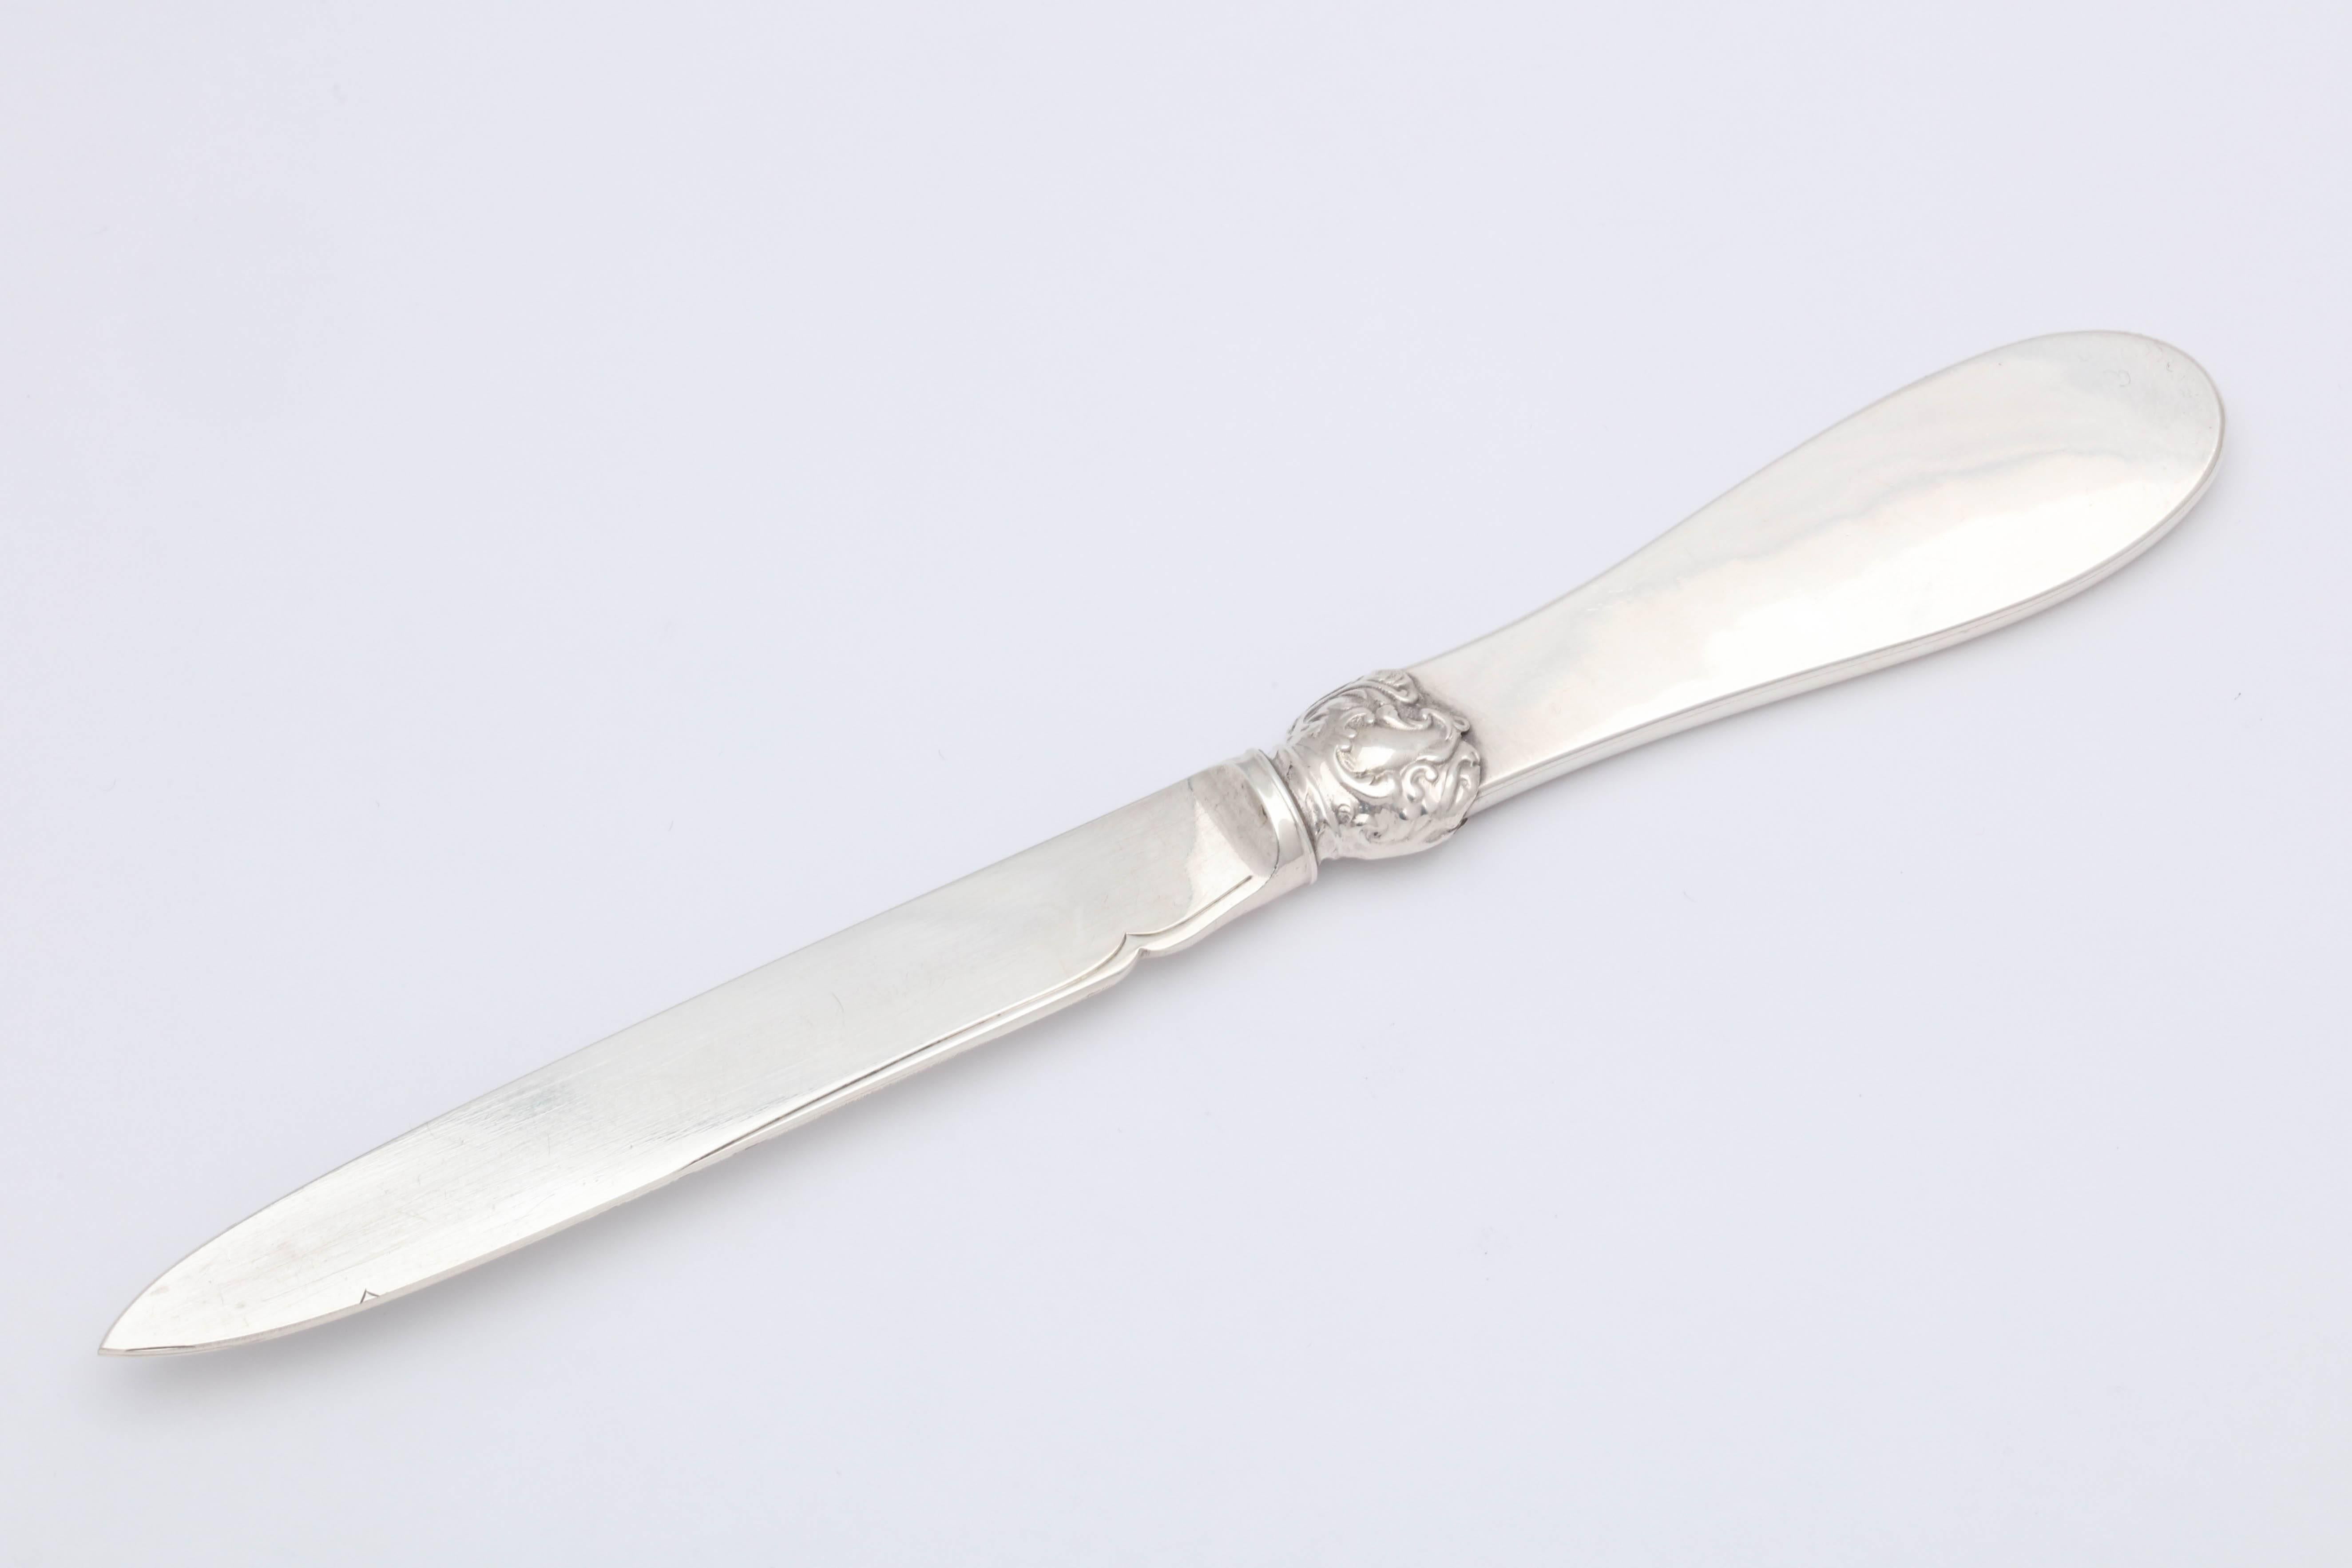 Edwardian style, sterling silver and pink guilloche enamel - mounted letter opener/paper knife, London, 1912, Goldsmiths and Silversmiths Co., Ltd. - makers. Sterling silver blade is etched. Beautiful, pink enamel is on one side of handle. Measures: